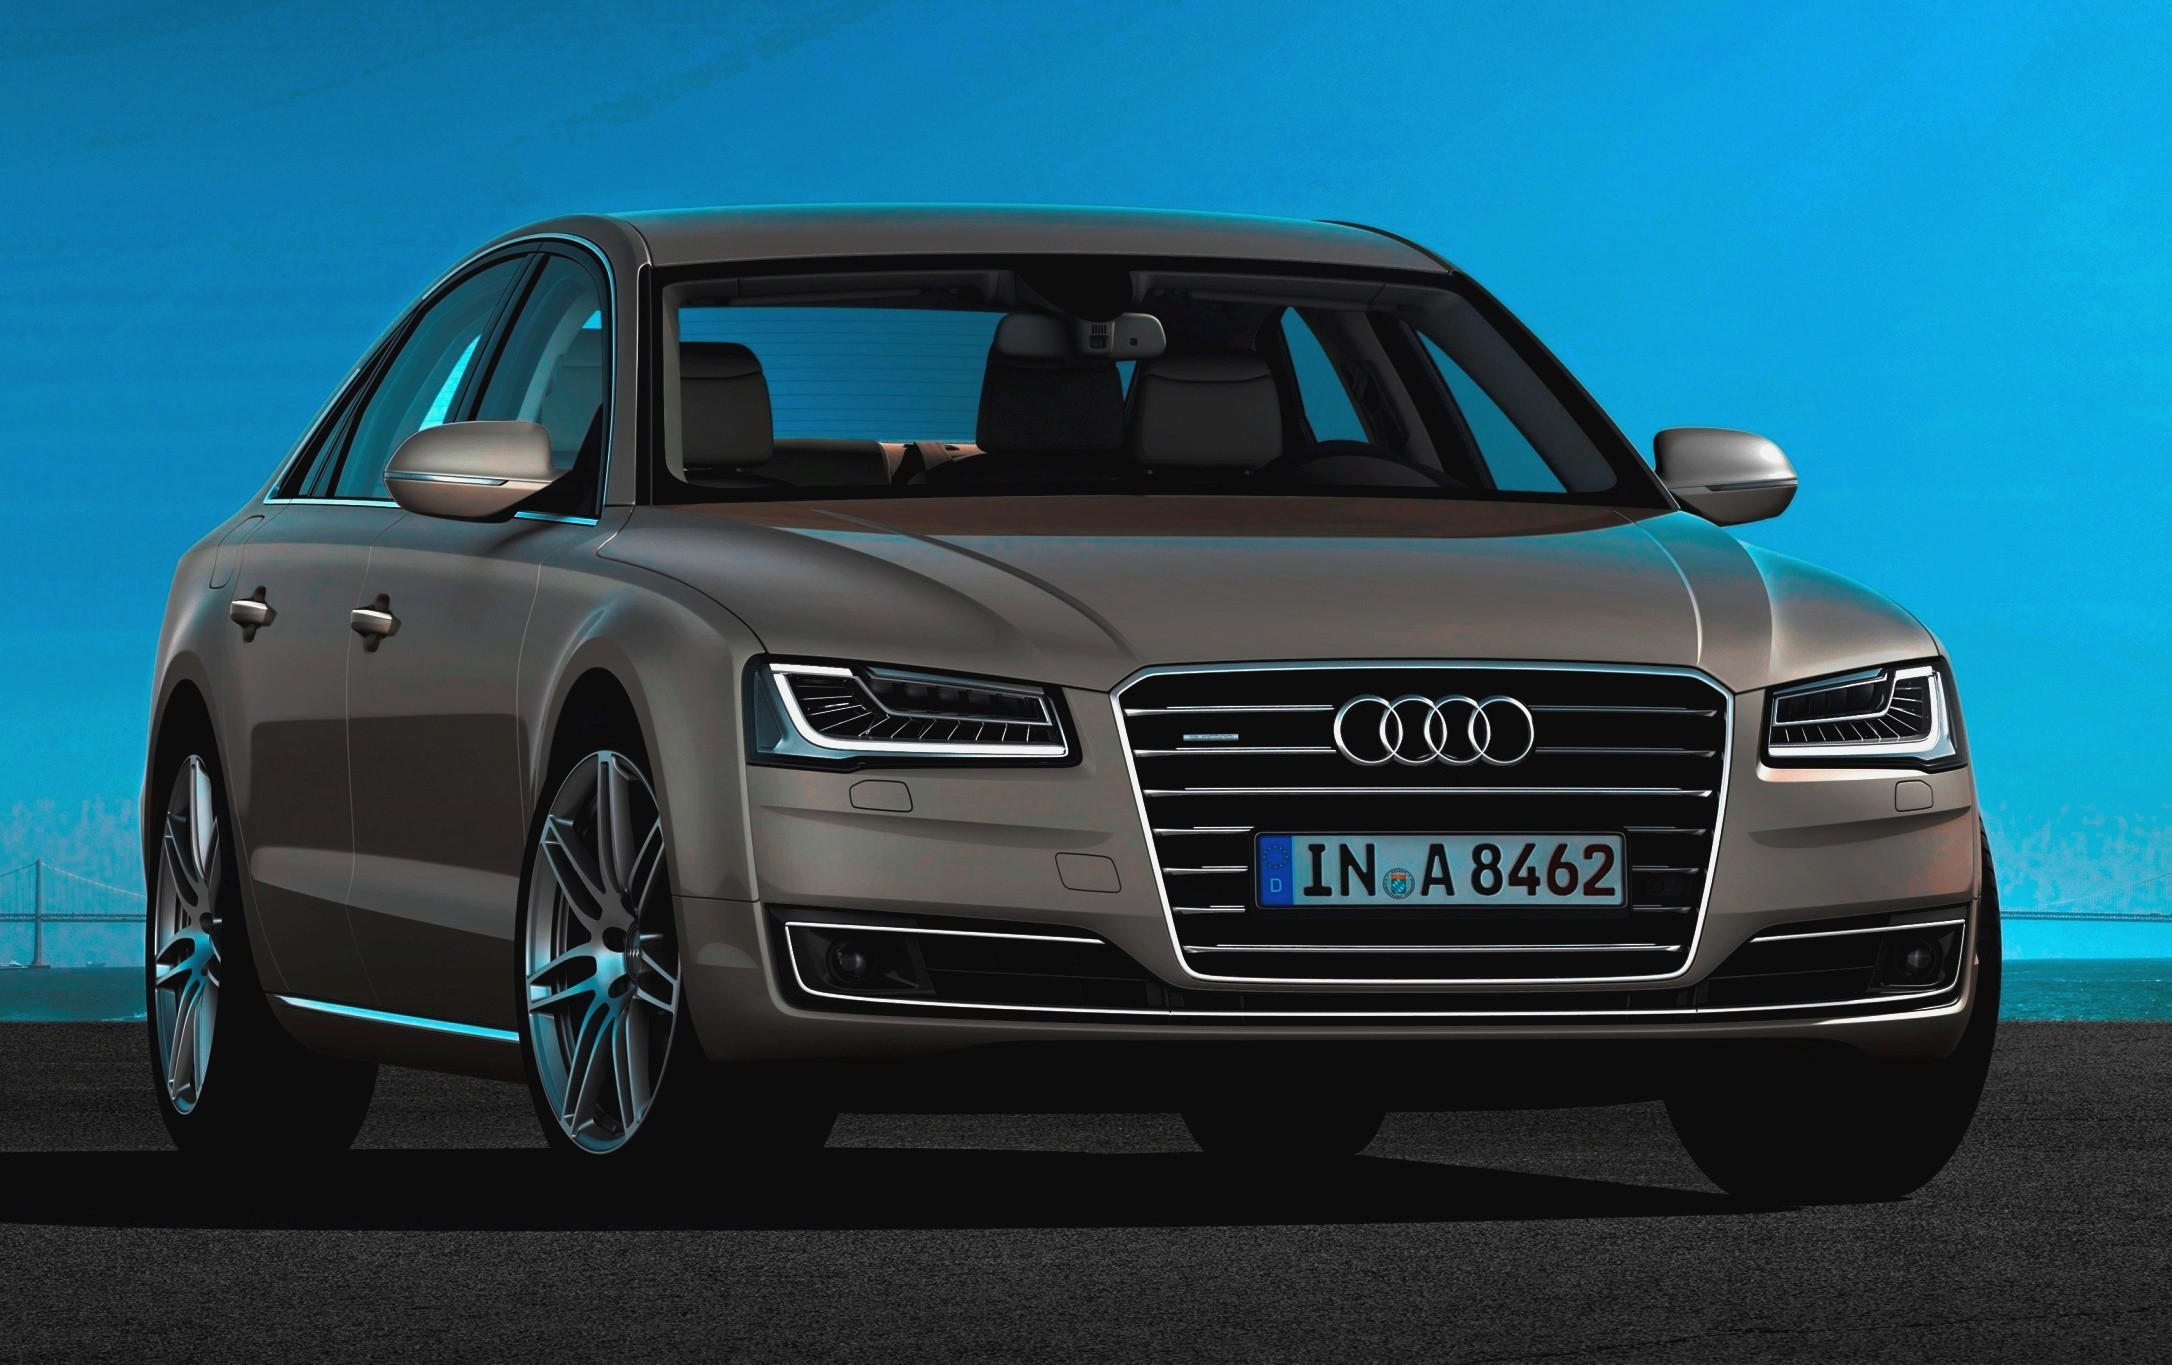 2015 Audi A8 Limps In With Same Old-Man Design, But Adds ...